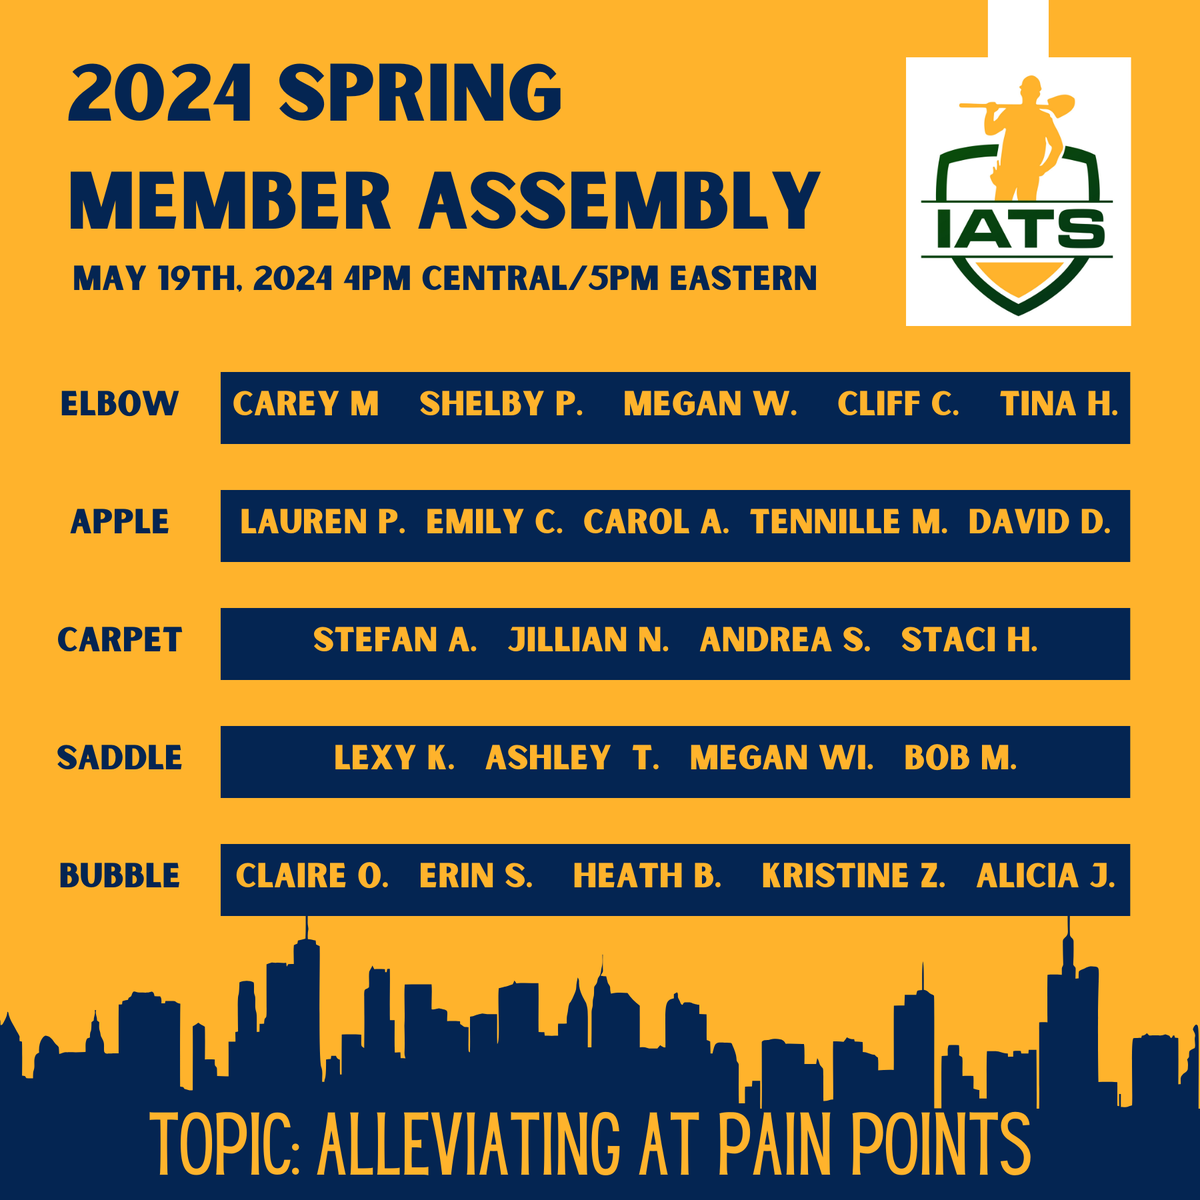 Breakout Groups are out. Thank you to all who registered and see you THIS Sunday at the Spring Member Assembly.

#IATS #athletictraining #ATTwitter